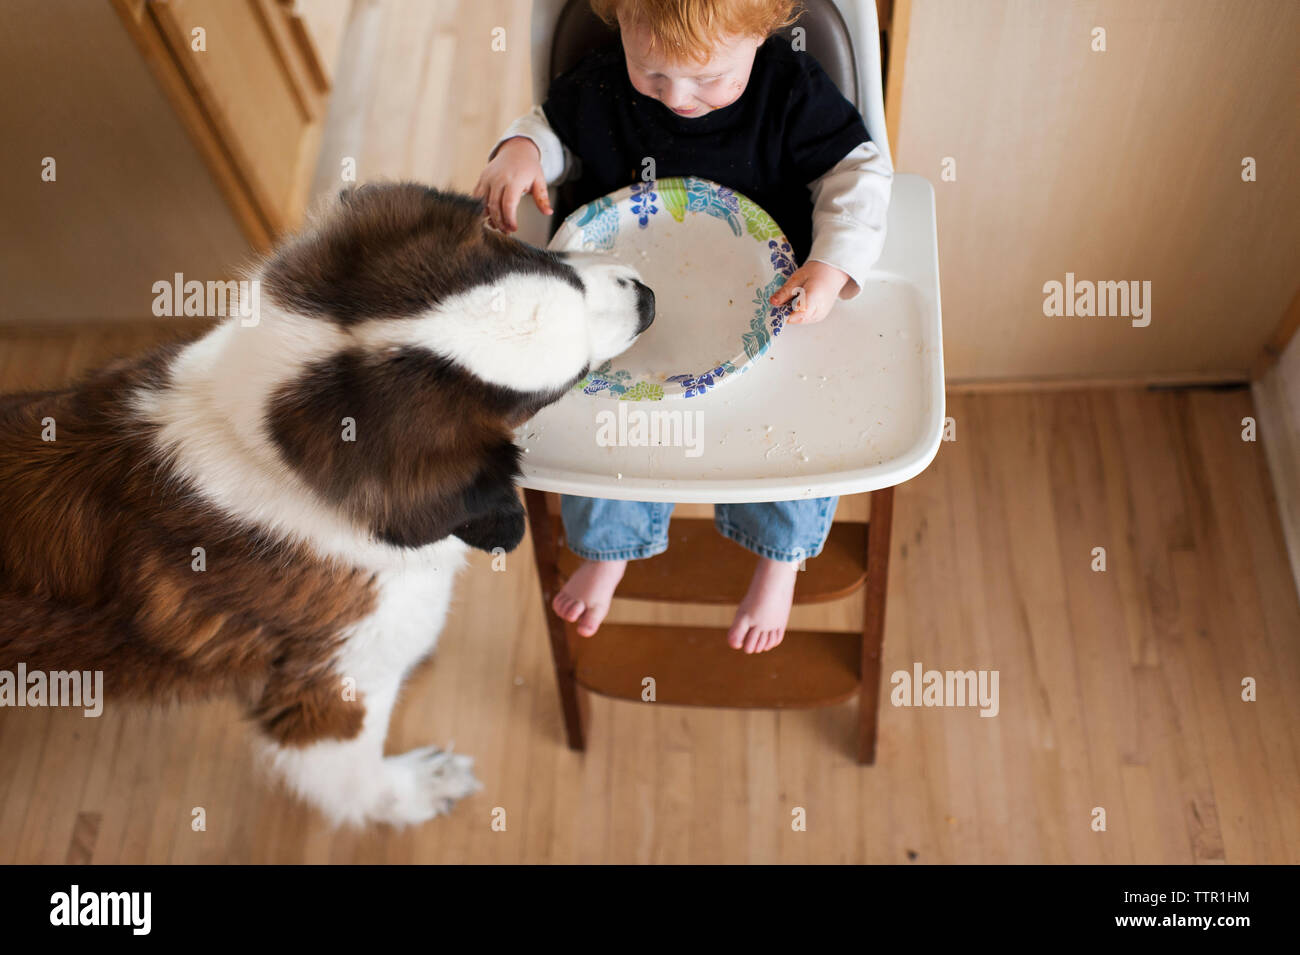 High angle view of dog eating leftovers in plate held by baby boy sitting on high chair at home Stock Photo